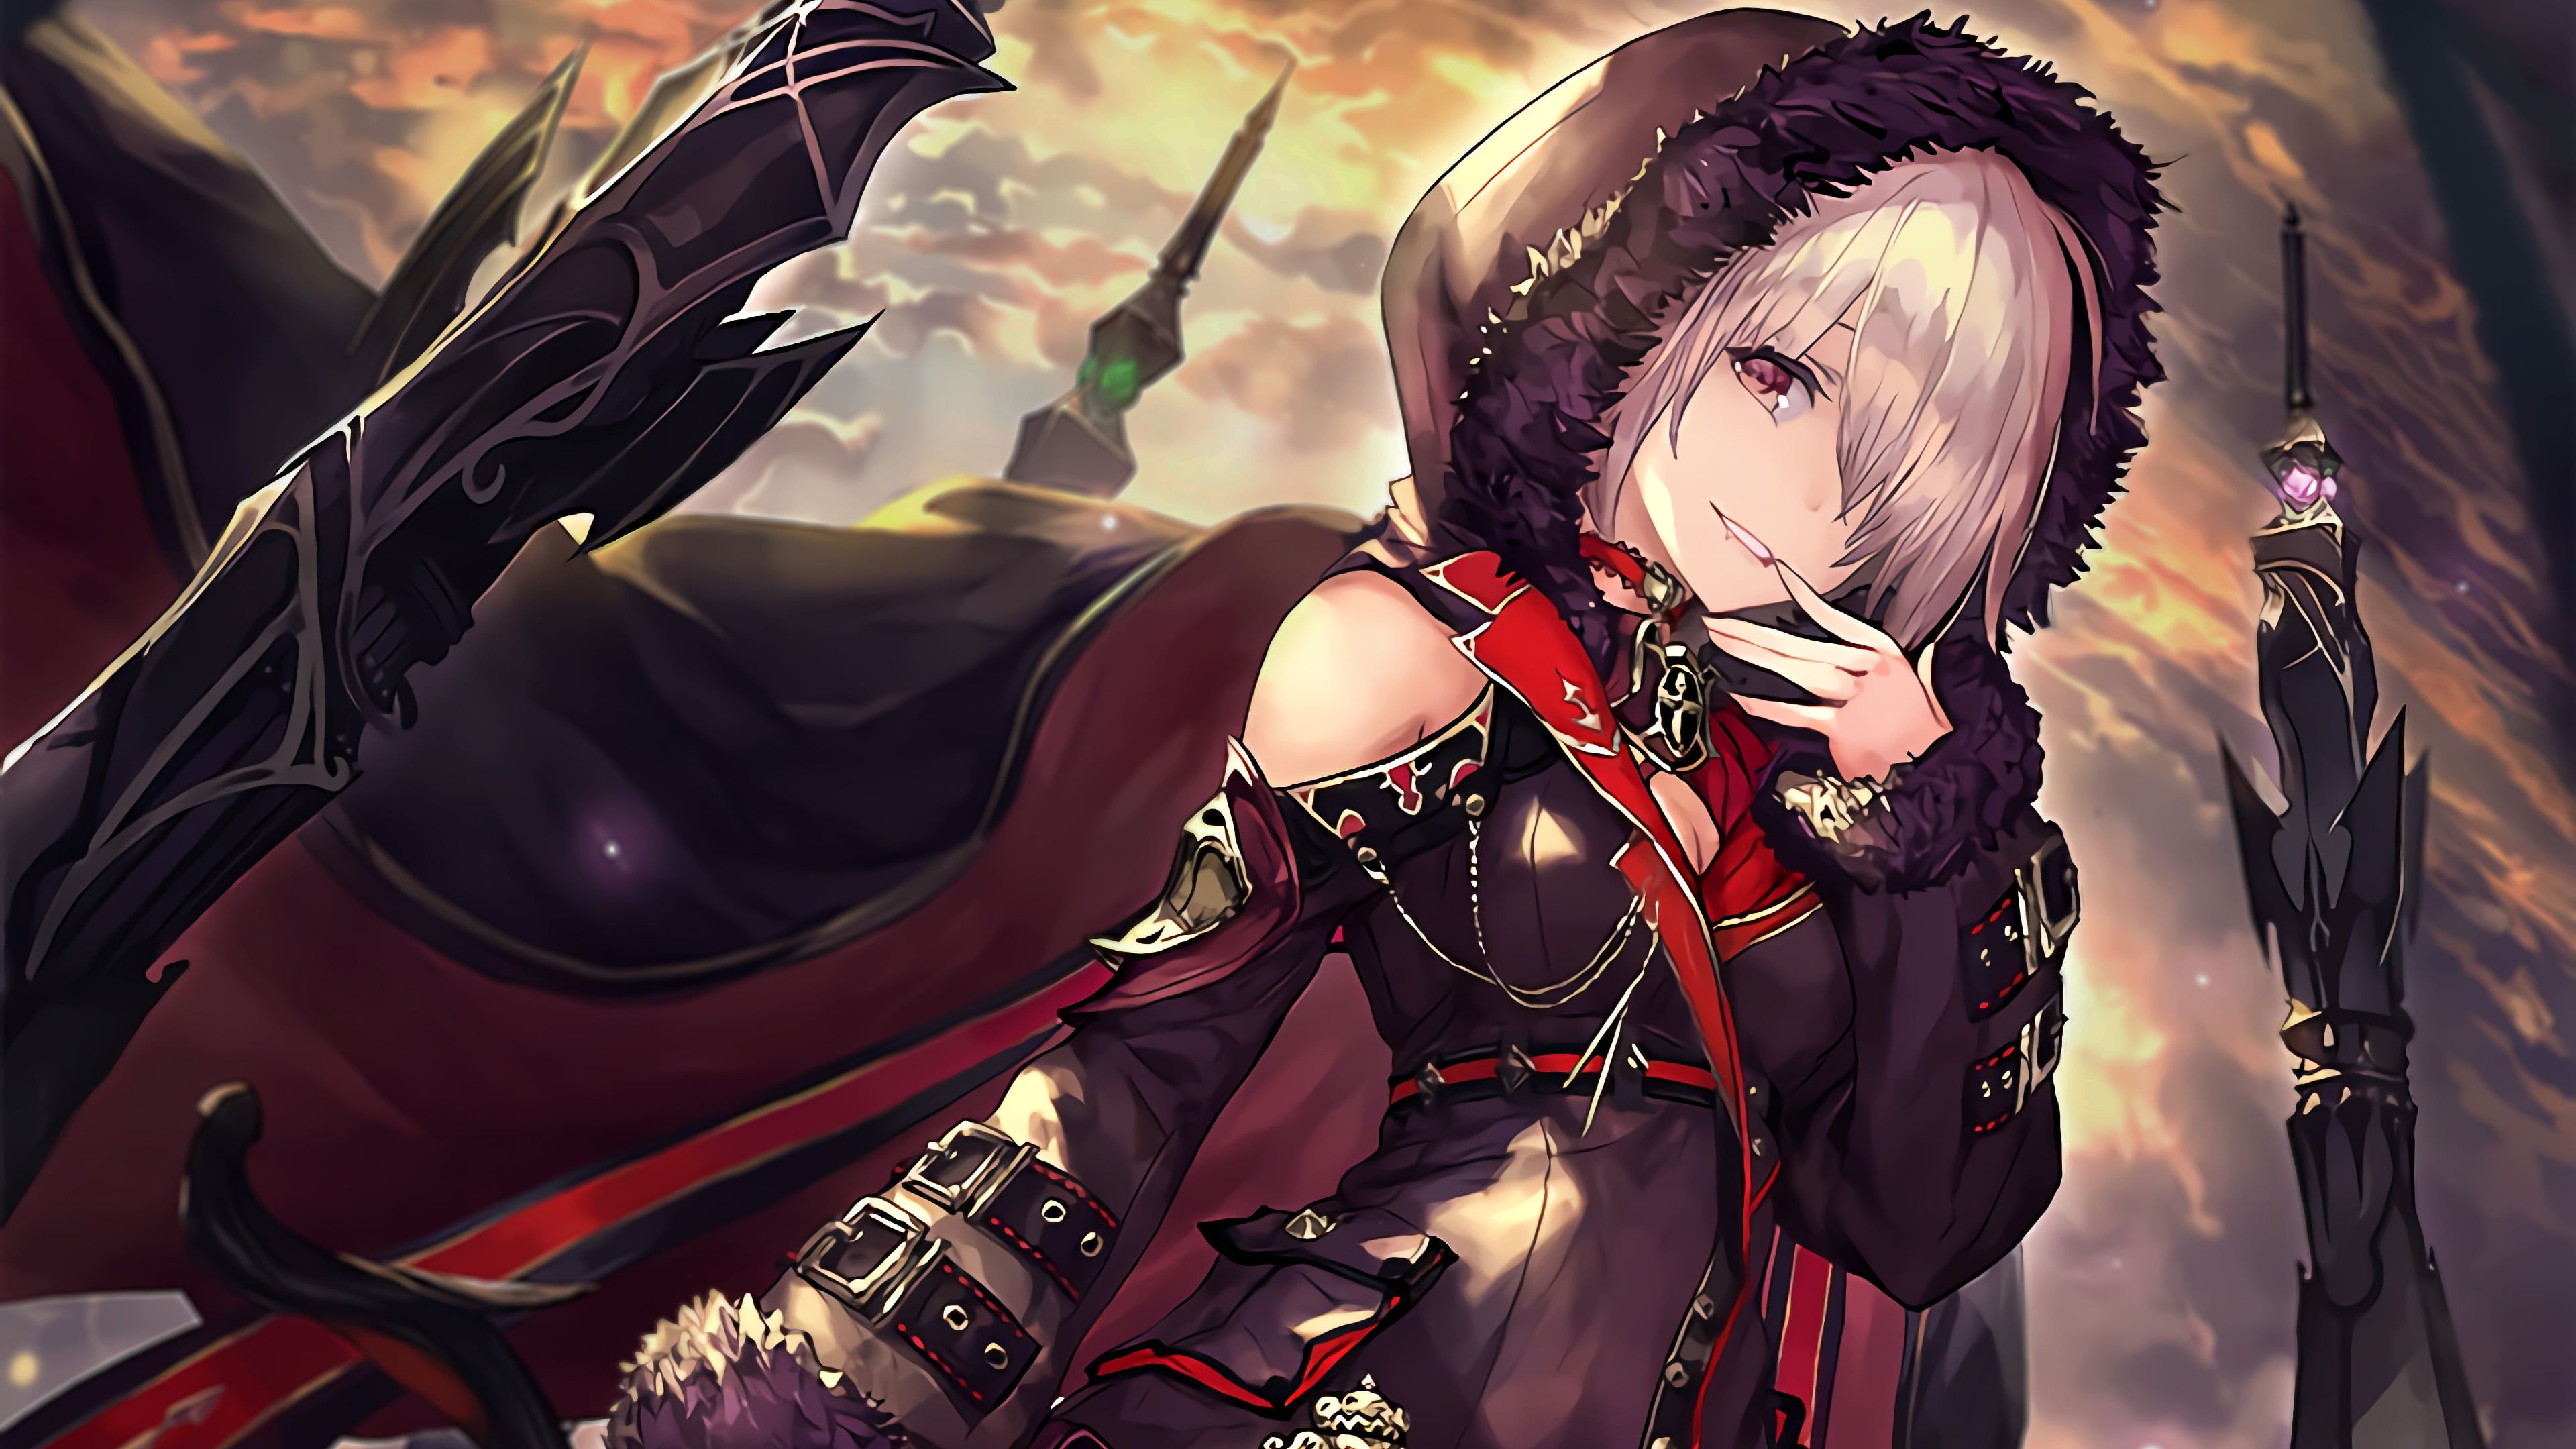 animated woman 3D wallpaper #anime #Shadowverse Wizardess of Oz